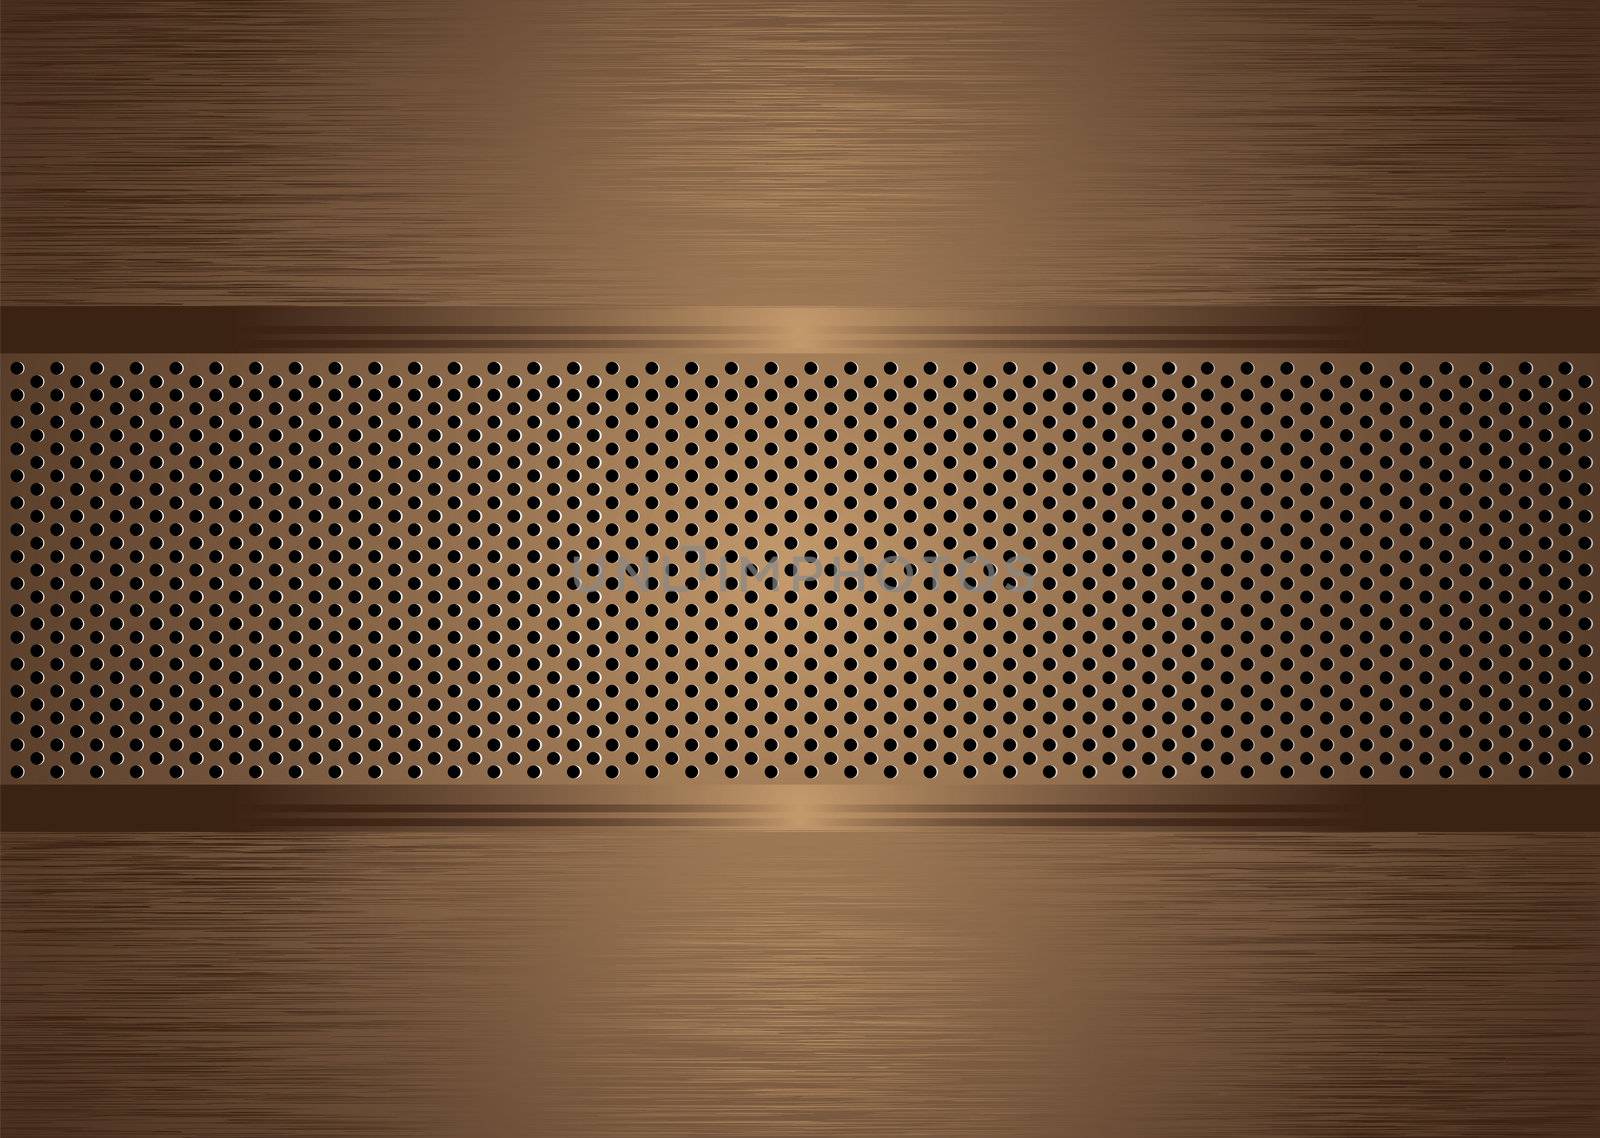 bronze abstract brushed metal background wit holes punched